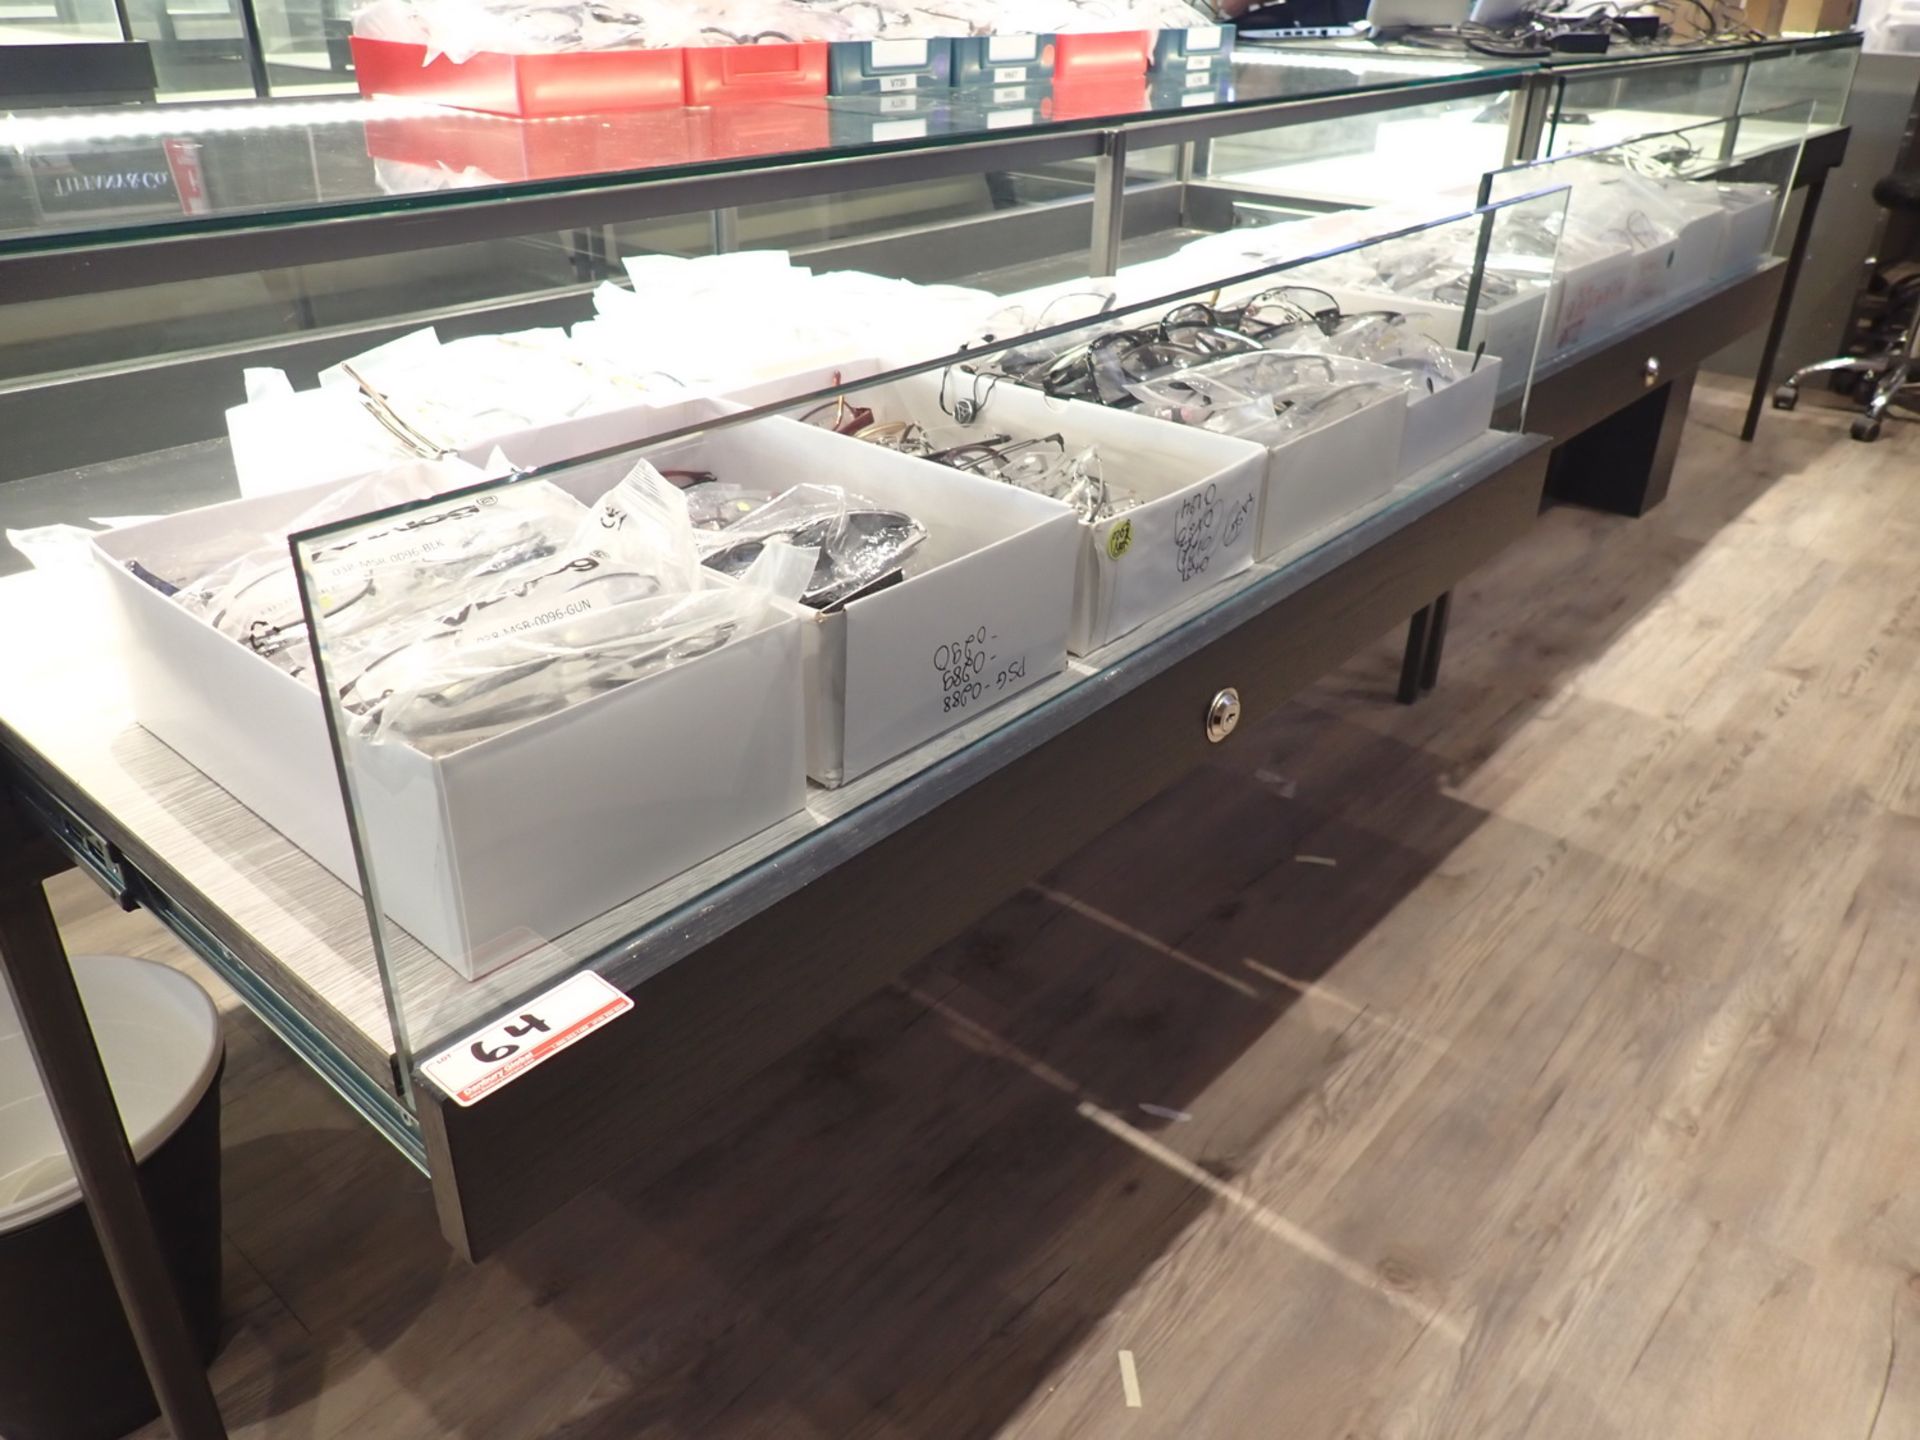 GLASS 6' X 20" X 36" DISPLAY CASE / RETAIL COUNTER W/ INTEGRATED LED LIGHTS (110V) & LOCKABLE PULL- - Image 2 of 2